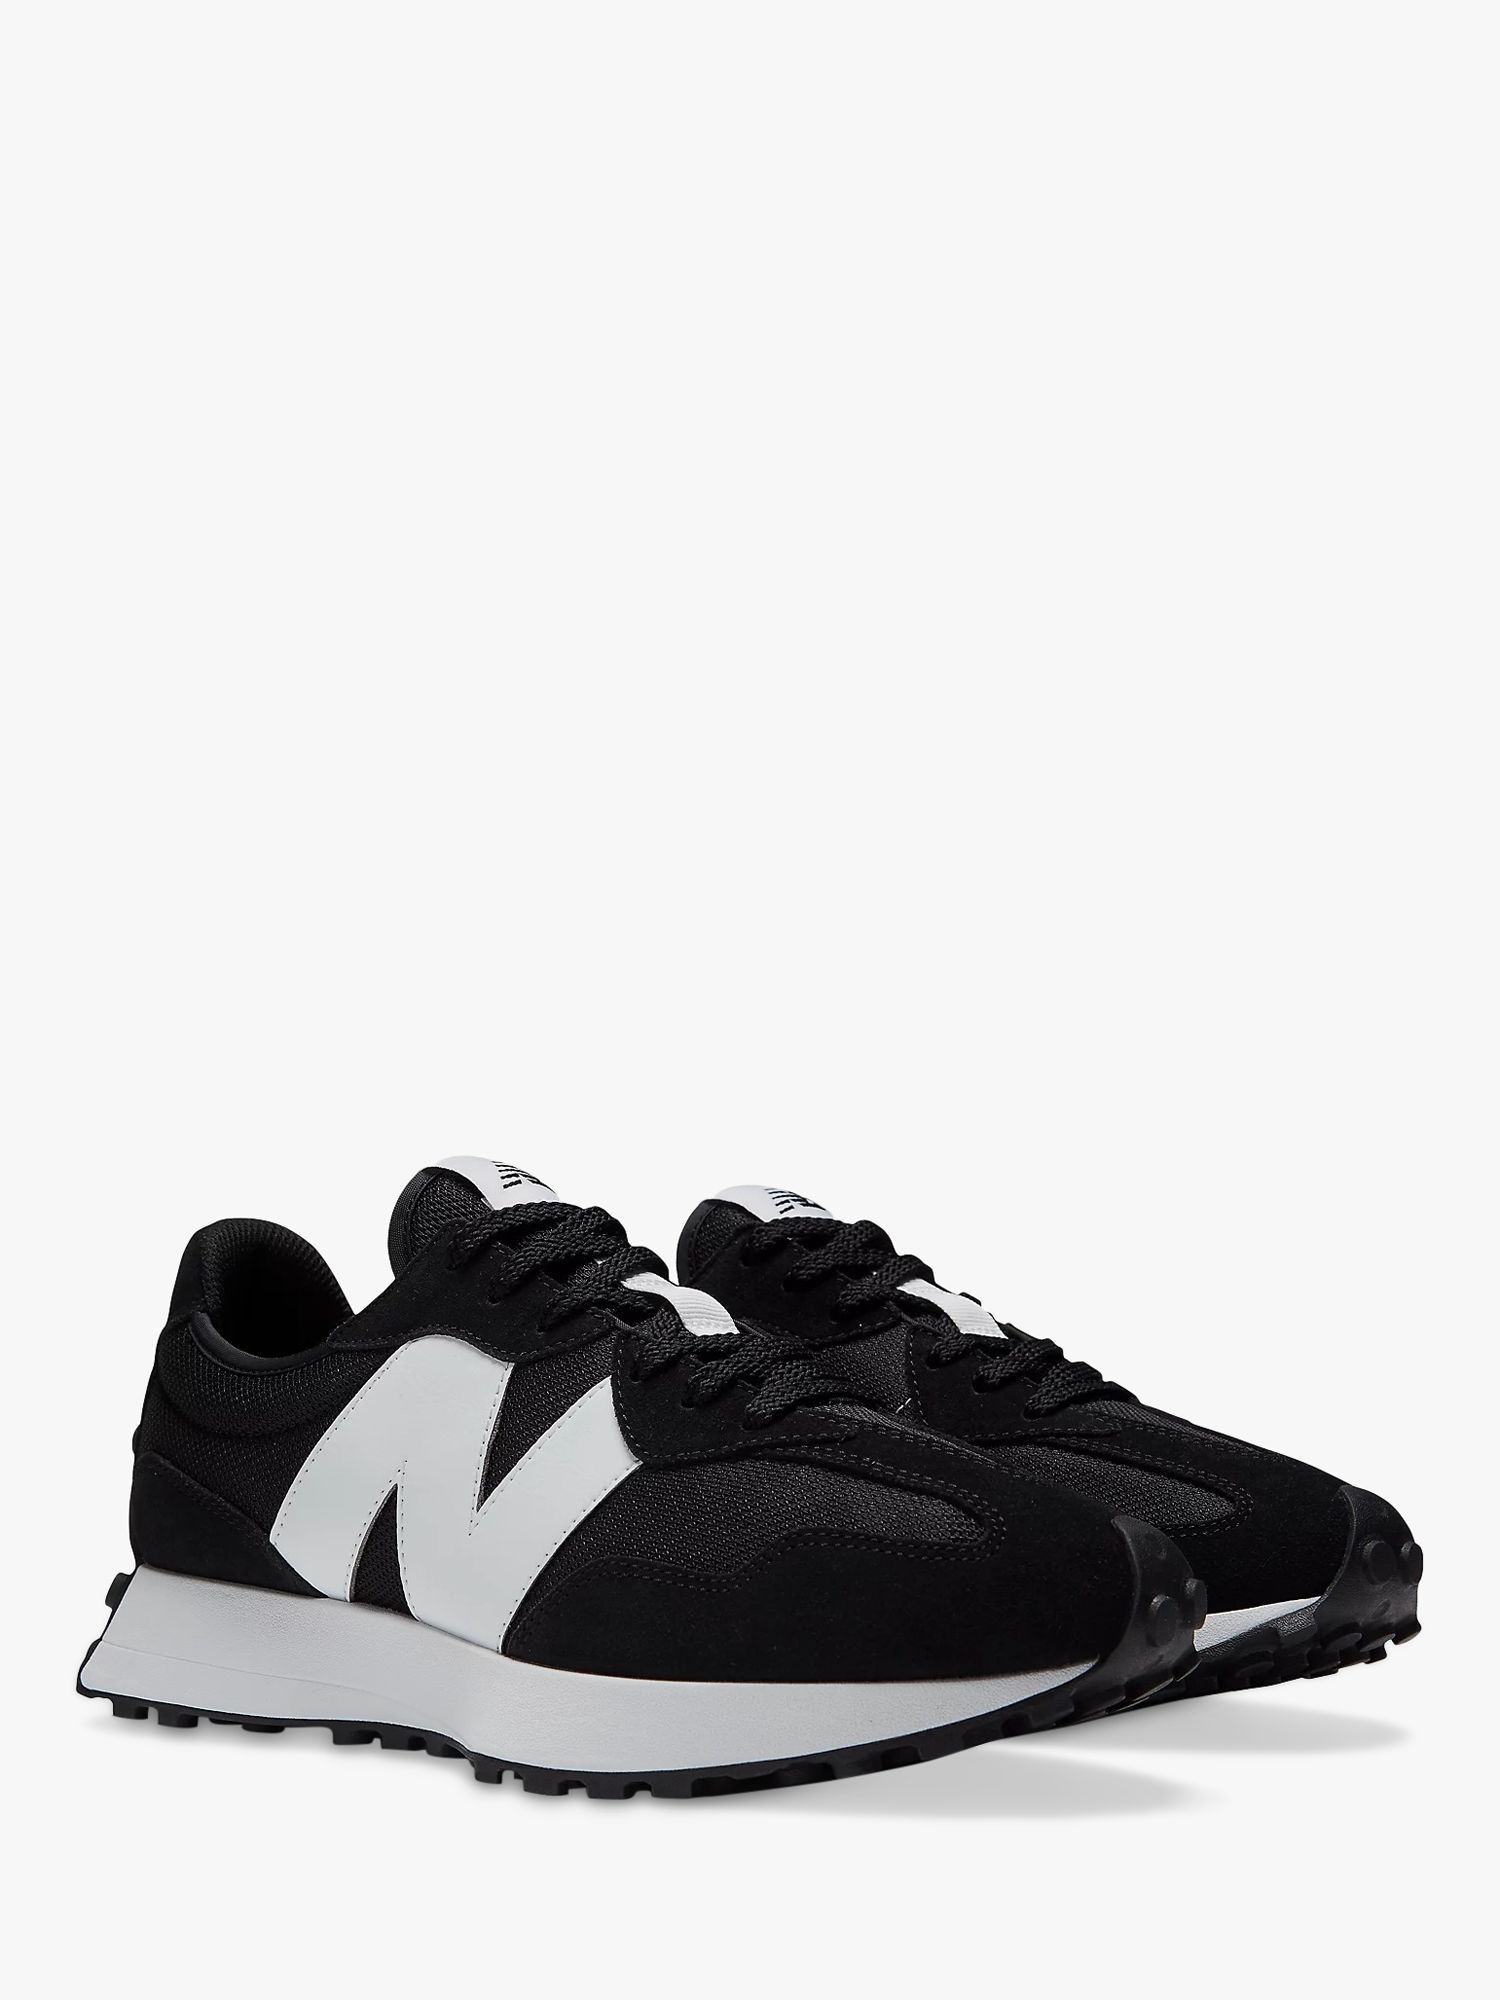 New Balance 327 Men's Suede Lace Up Trainers, Black at John Lewis ...